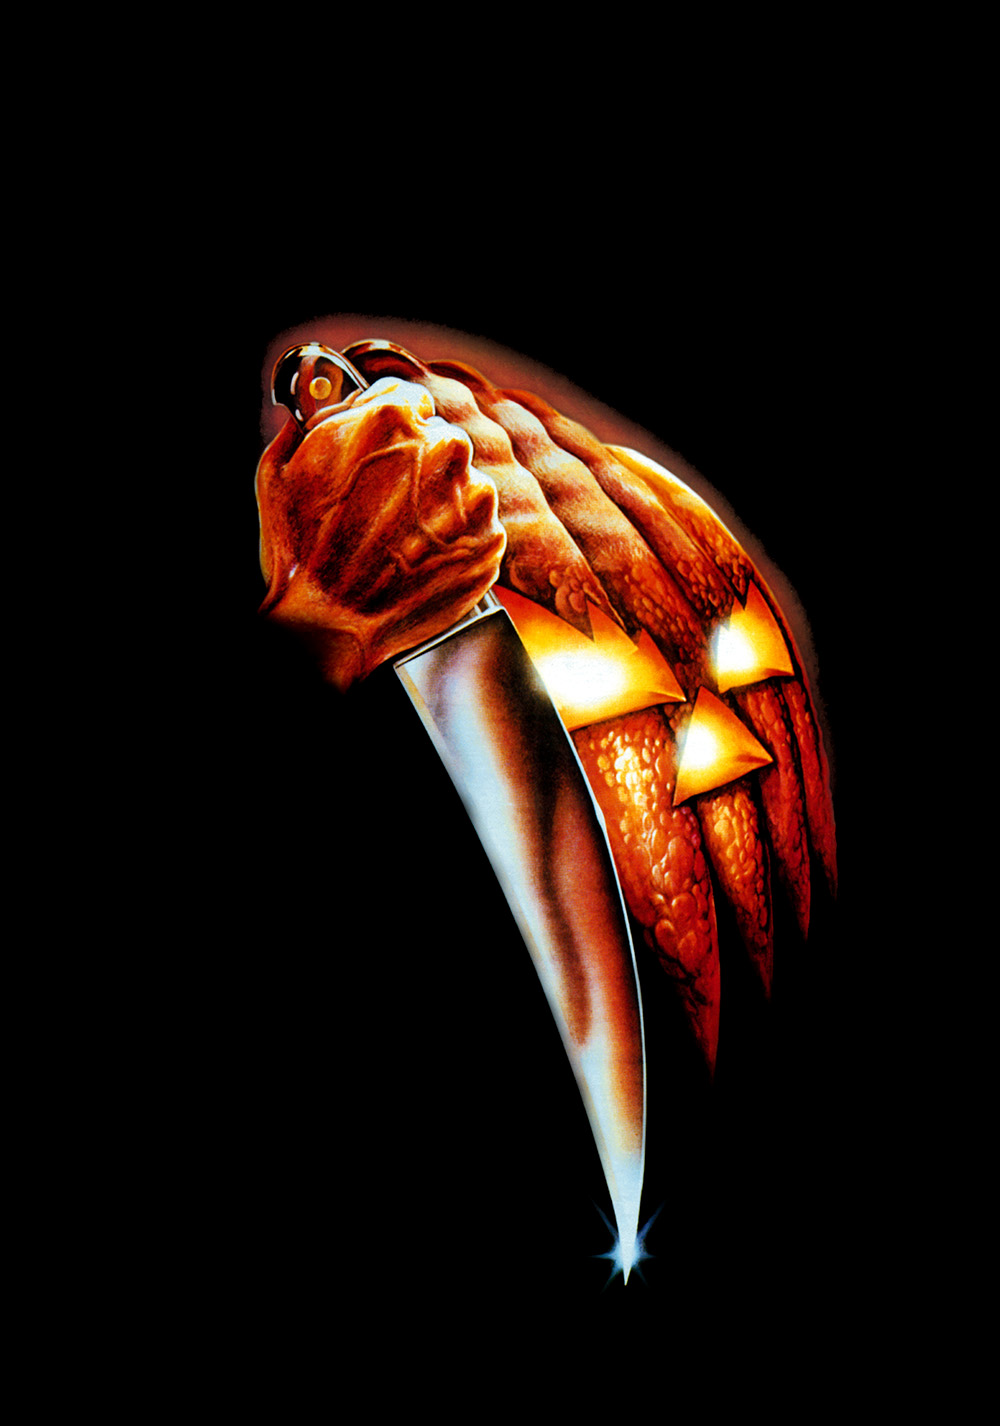 Only a Film Expert Can Name 14/17 of These Horror Movies from Their Posters 07 Halloween